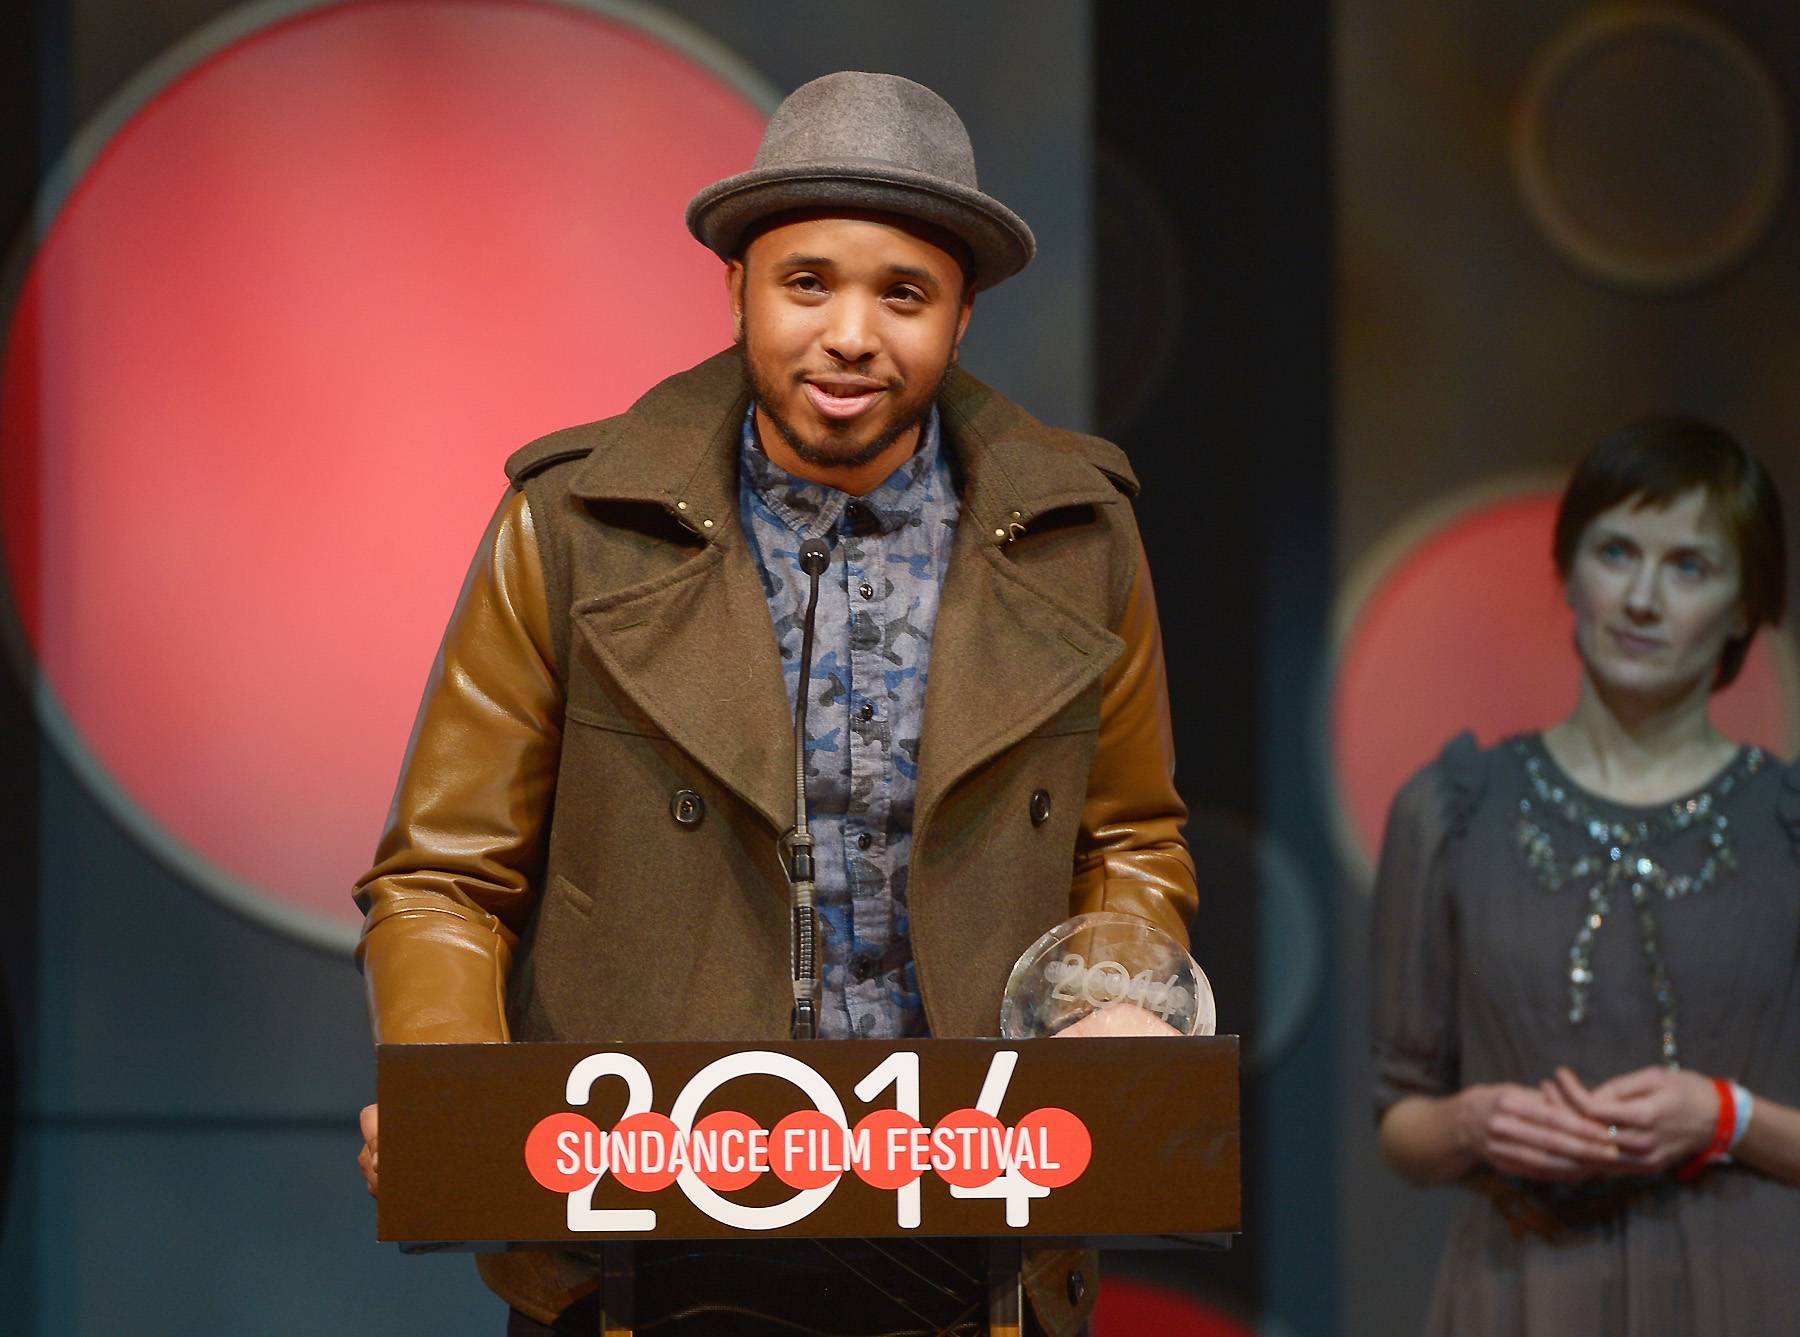 The Watch List - At the 2014 Sundance Film Festival, Justin Simien won the U.S. Dramatic Special Jury Award for Breakthrough Talent for his genius&nbsp;Dear White People. There was no surprise then when Justin was named one of Variety's &quot;10 Directors to Watch.&quot;(Photo: Michael Loccisano/Getty Images for Sundance Film Festival)